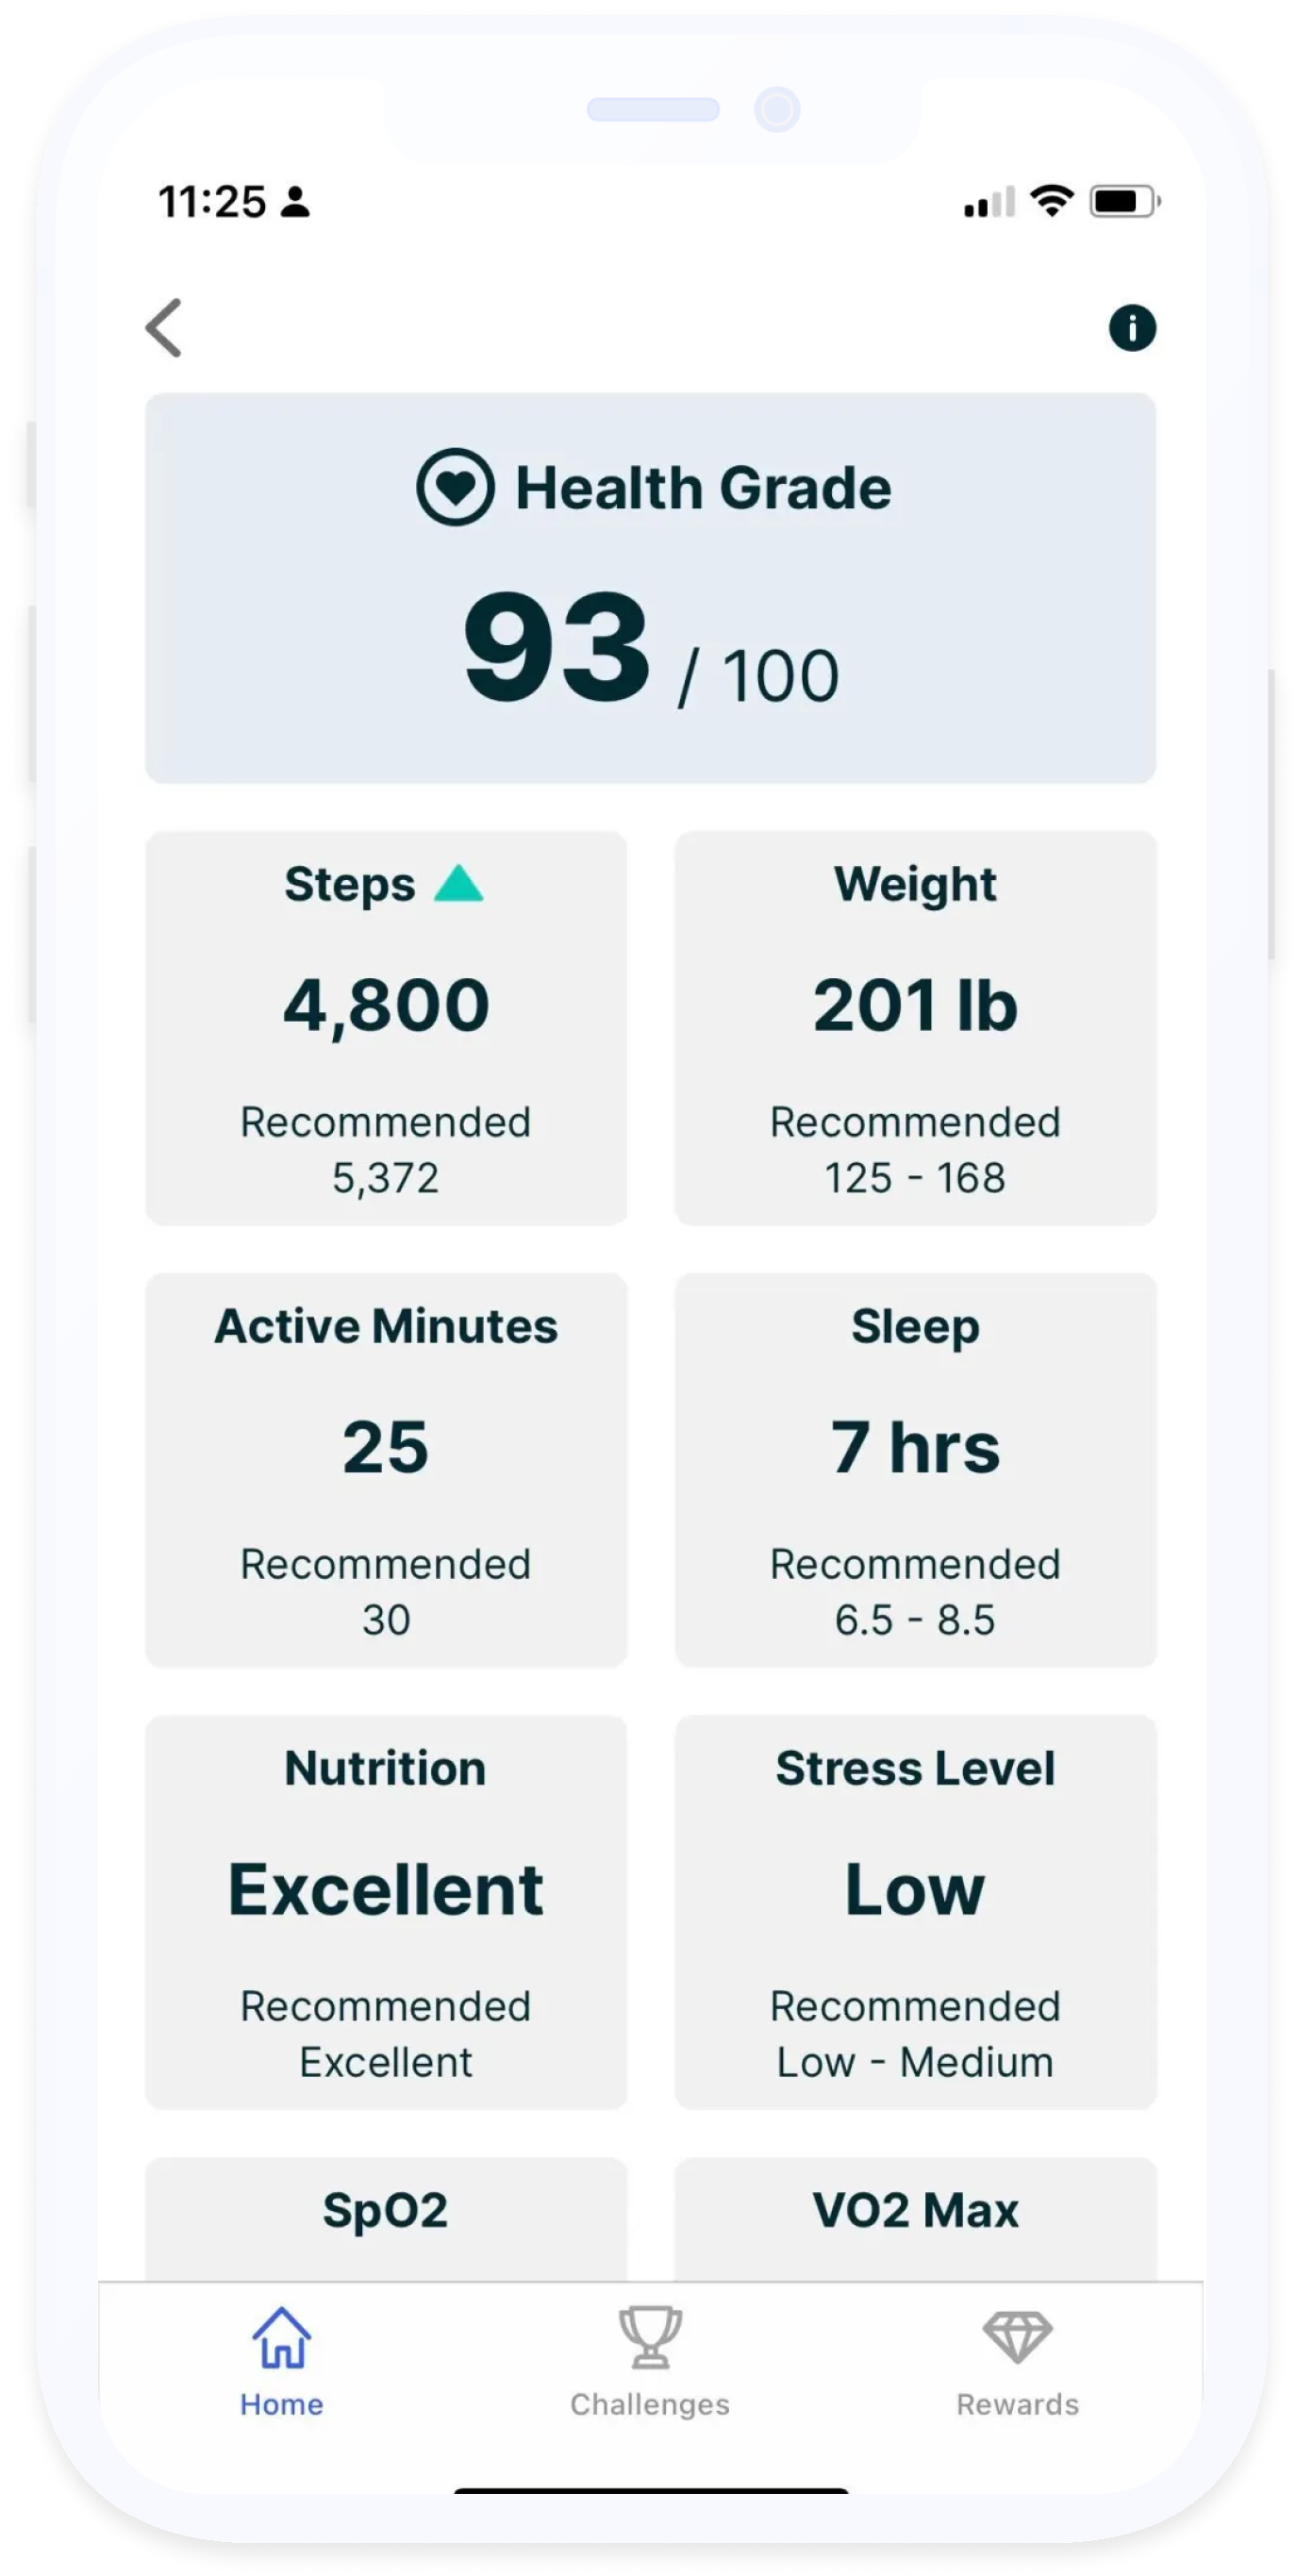 Optimity app users can view and track their Health Grade and various health sub-scores in one dashboard view